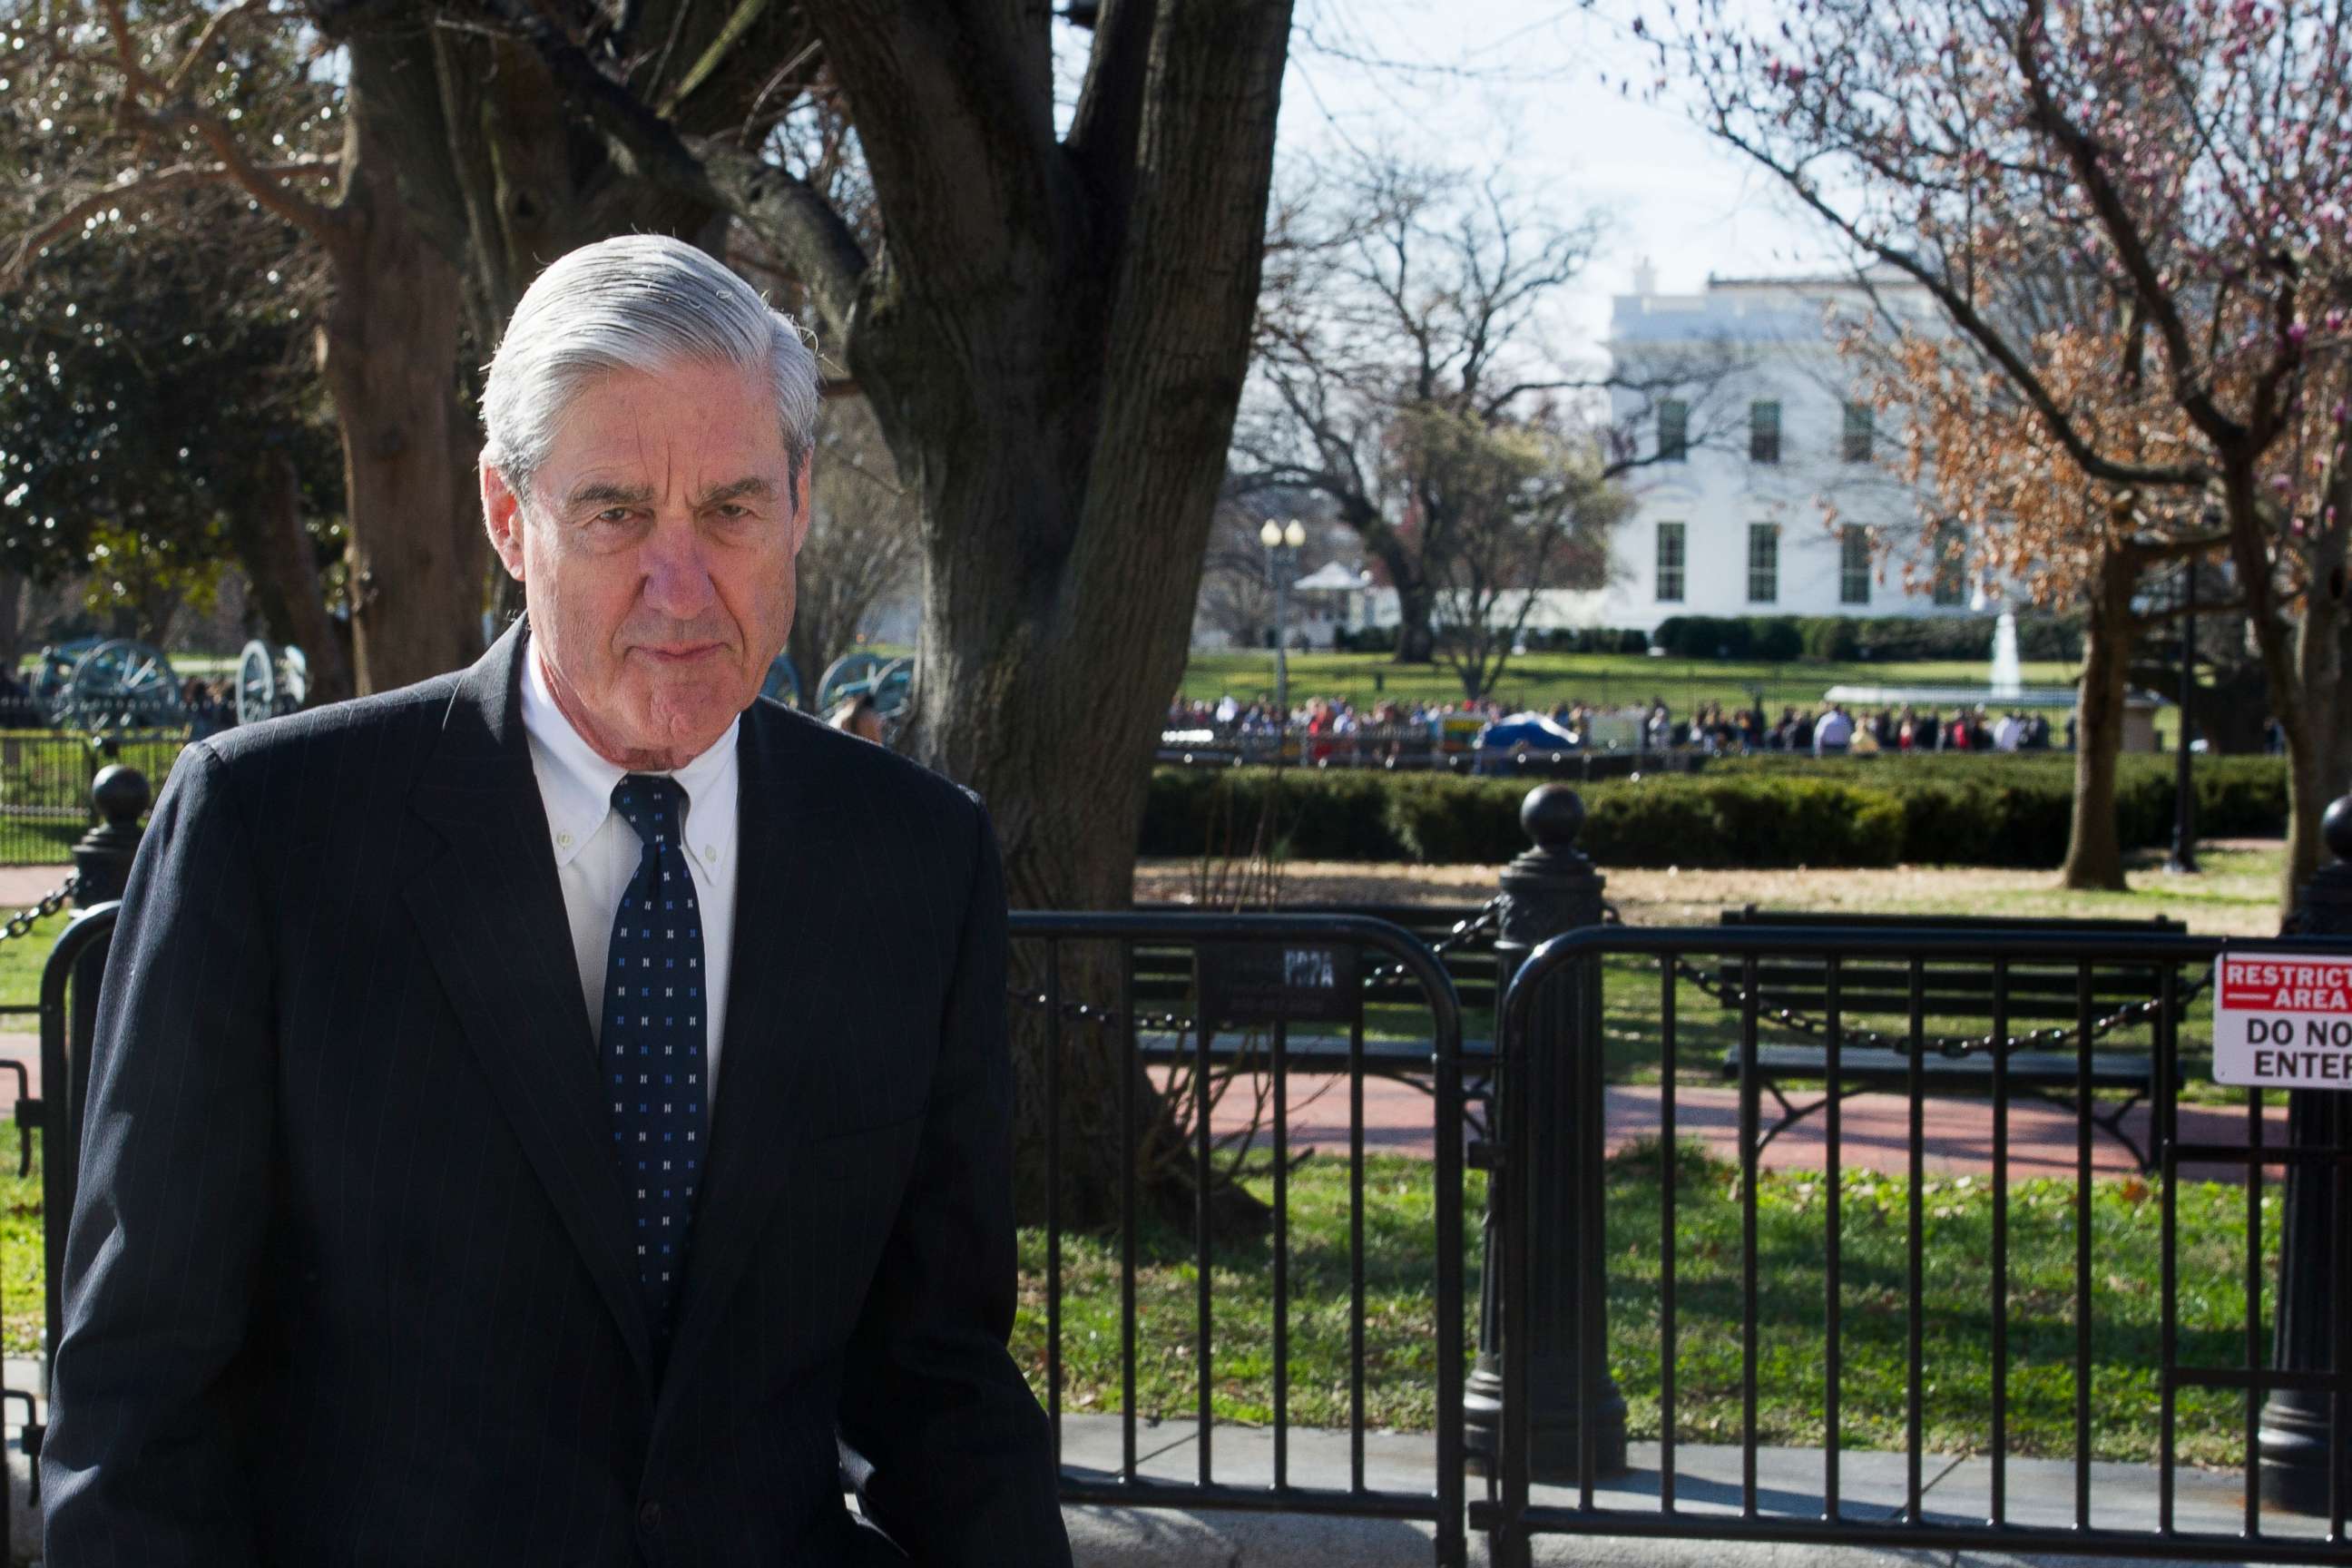 PHOTO: Special Counsel Robert Mueller walks past the White House, after attending St. John's Episcopal Church for morning services, March 24, 2019 in Washington.